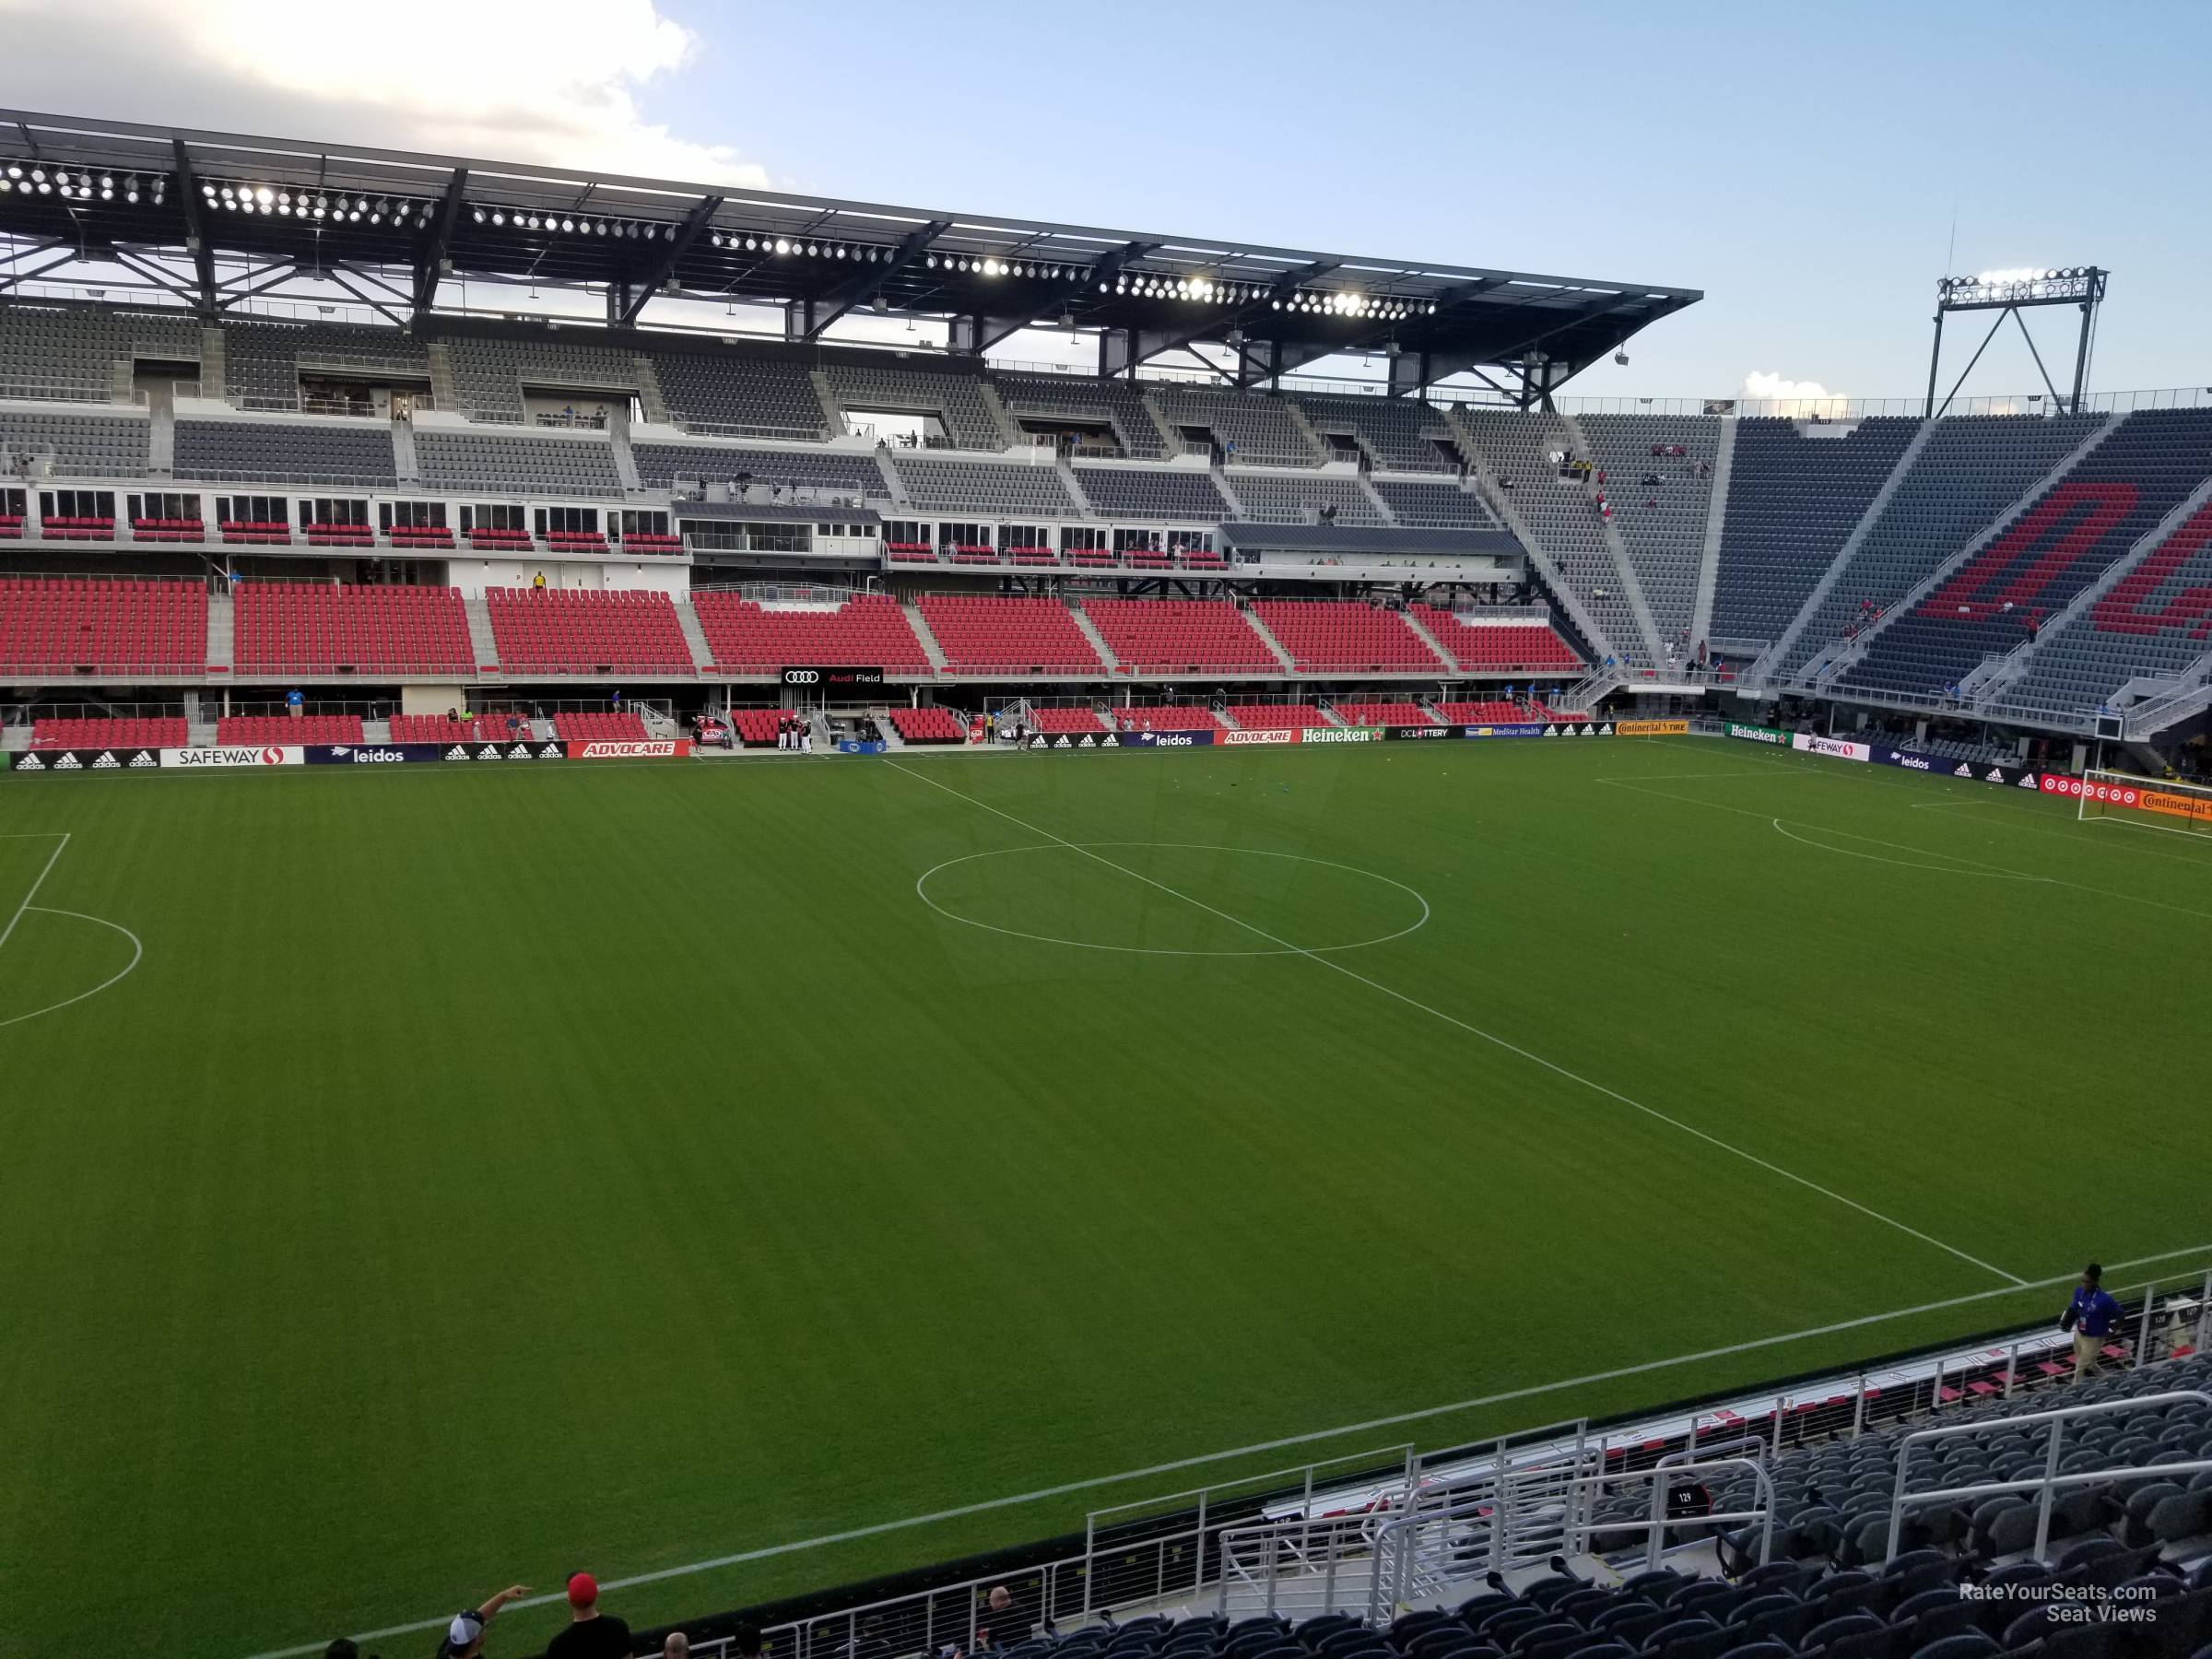 section 129, row 19 seat view  - audi field